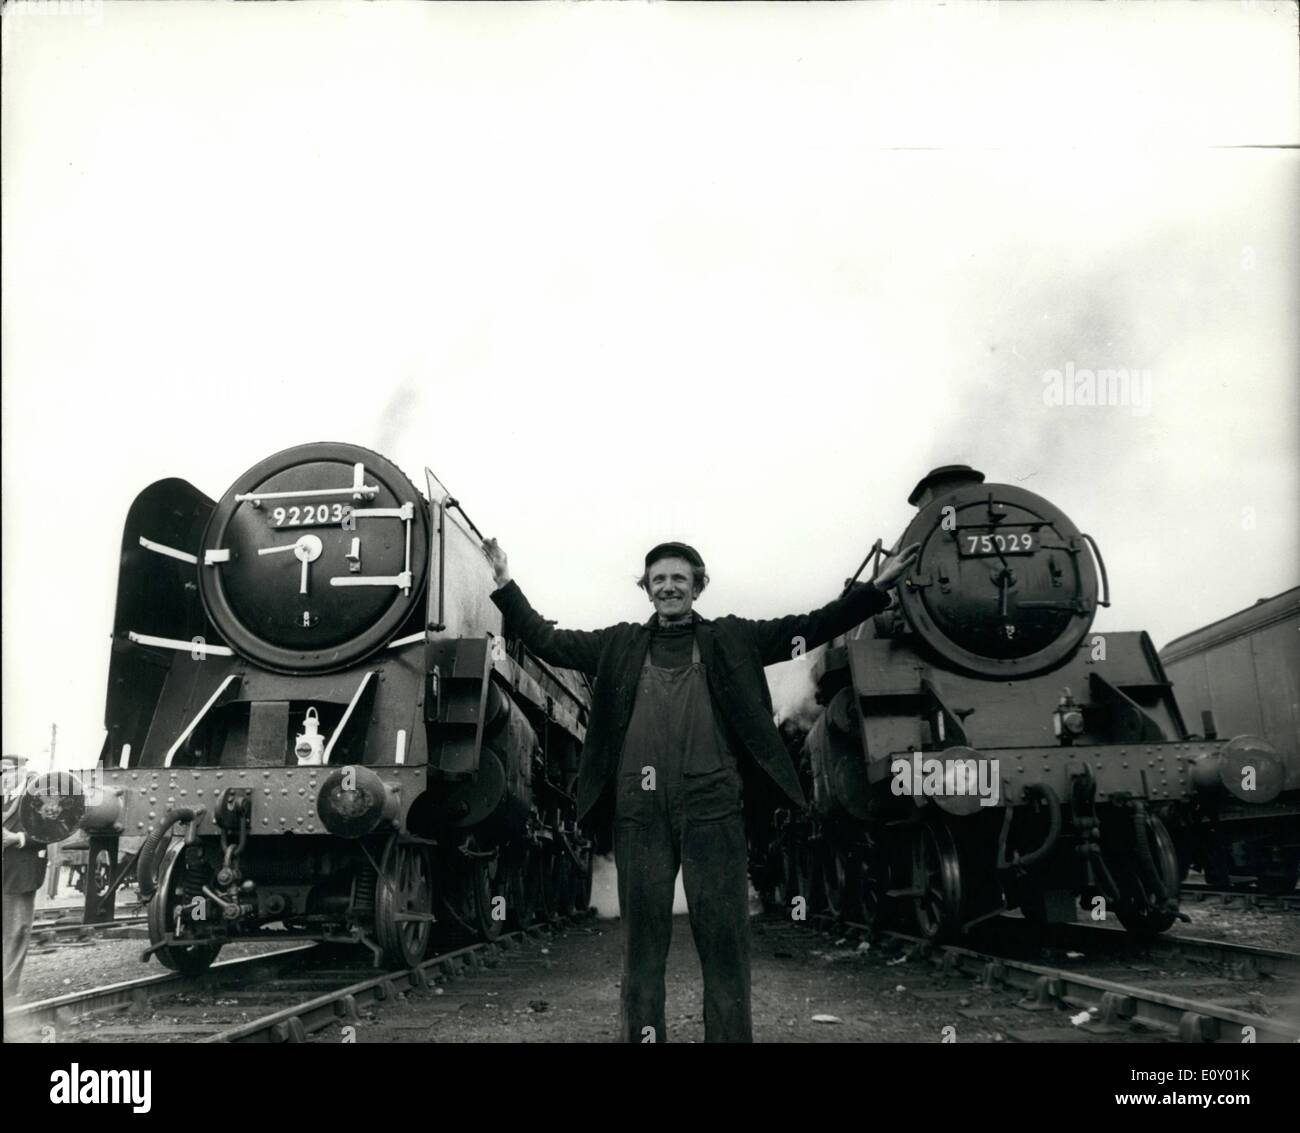 Apr. 04, 1968 - Artist Buys Two Locomotives from British Rail. Following a highly successful exhibition of his wild life paintings, the well known artist, David Shepherd, whose two main interests in life are railways and the preservation of wild life, has purchased two steam locomotives from British Railways. This weekend the two locomotives No. 75029, a BR Class 4, and No. 92203, a BR Class 9F, travelled down from Crewe, coupled together, to the British Rail depot at Cricklewood, in North London Stock Photo